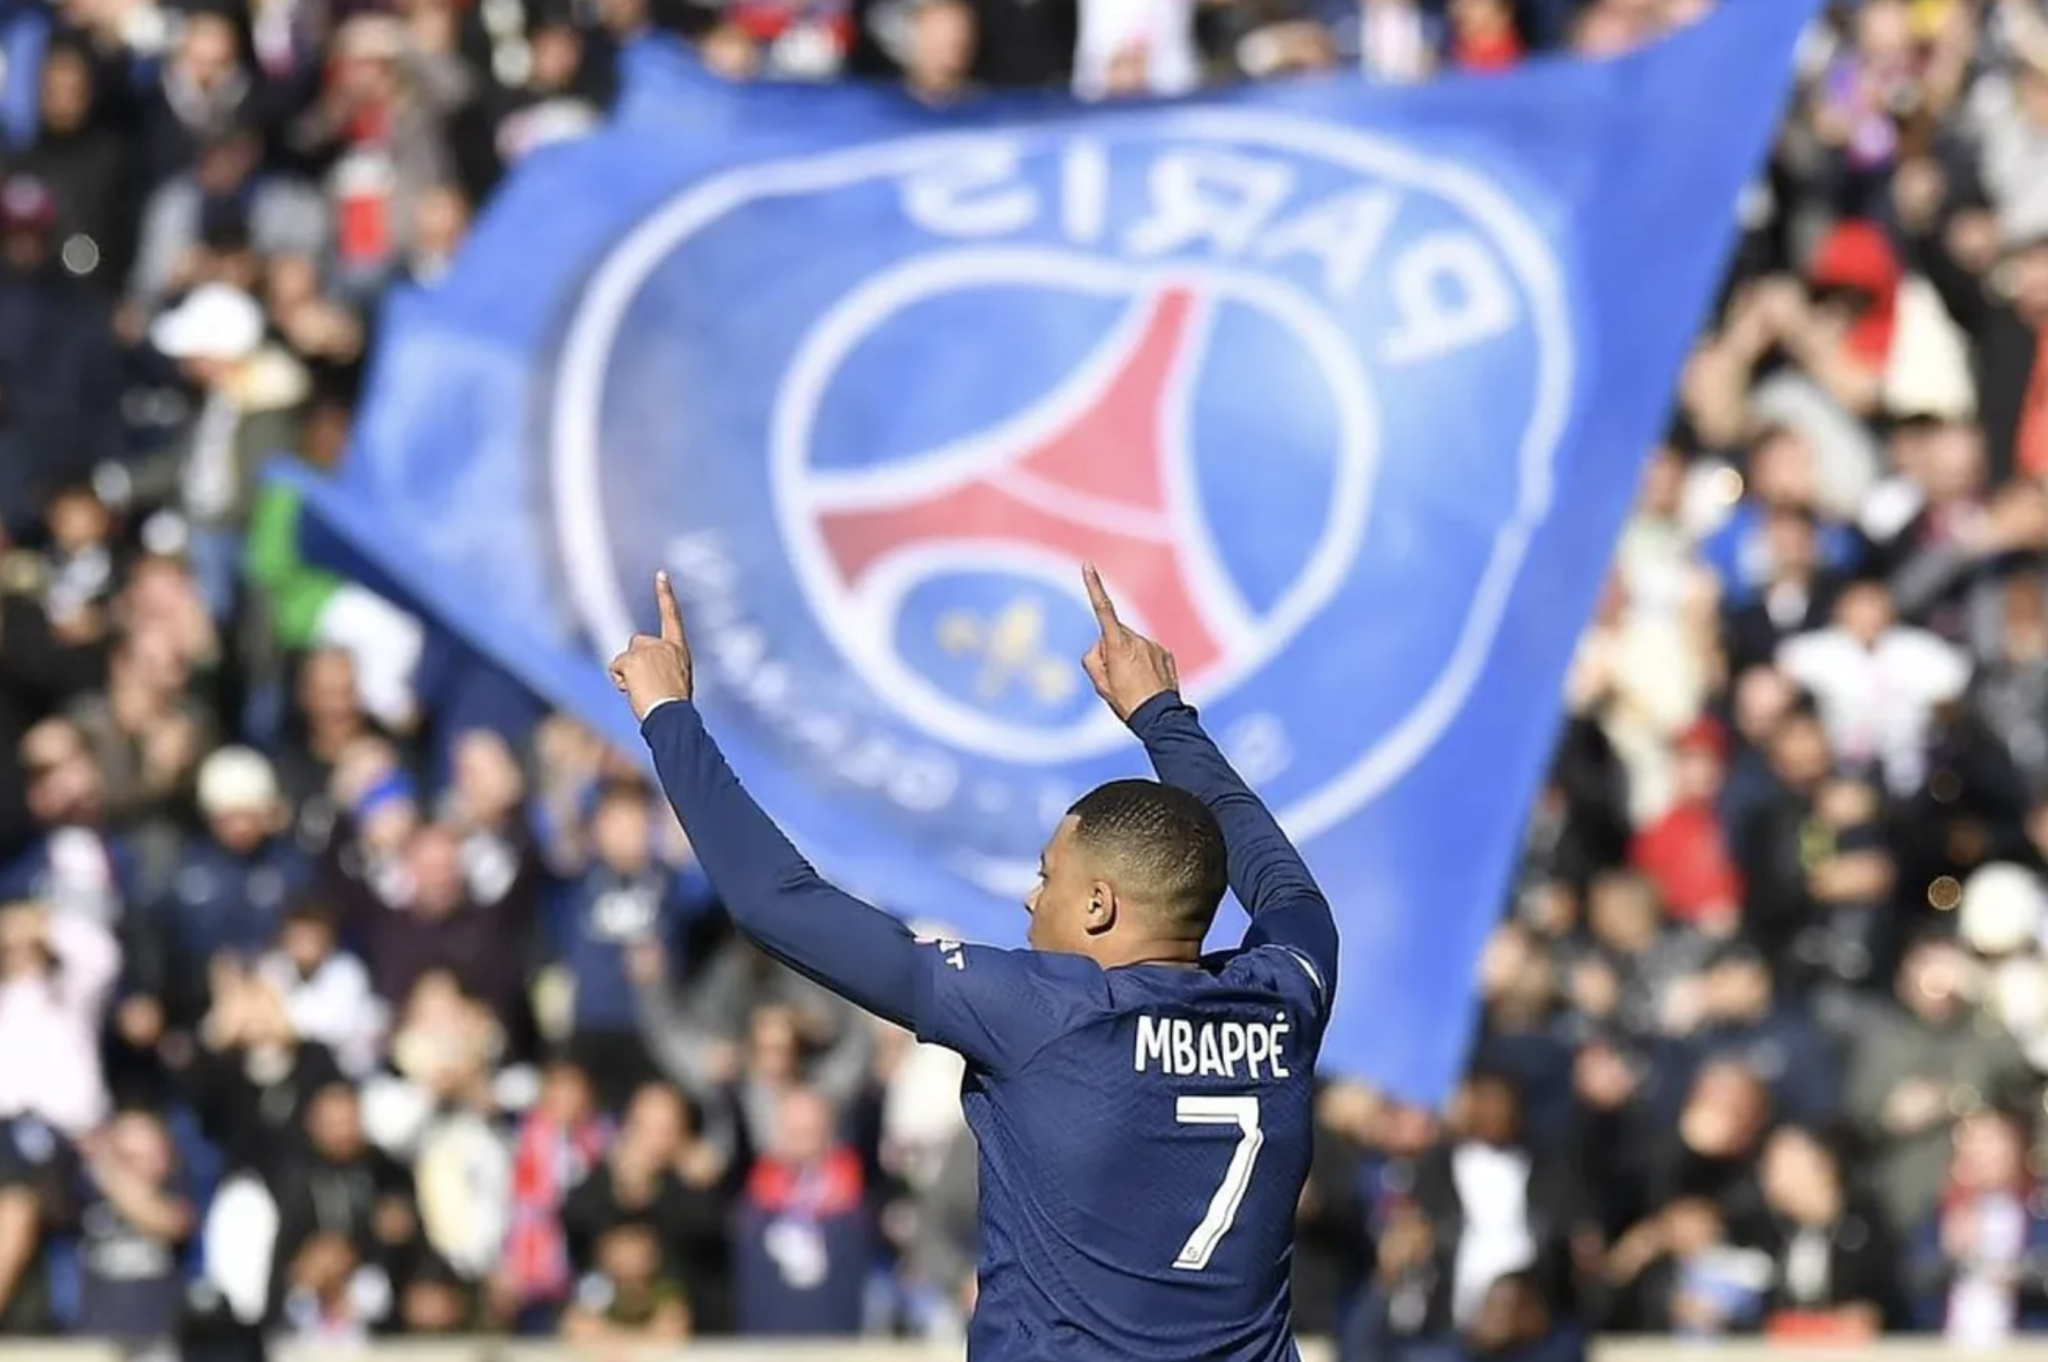 Mbappe and his secret pact with Al-Khelaifi to leave PSG